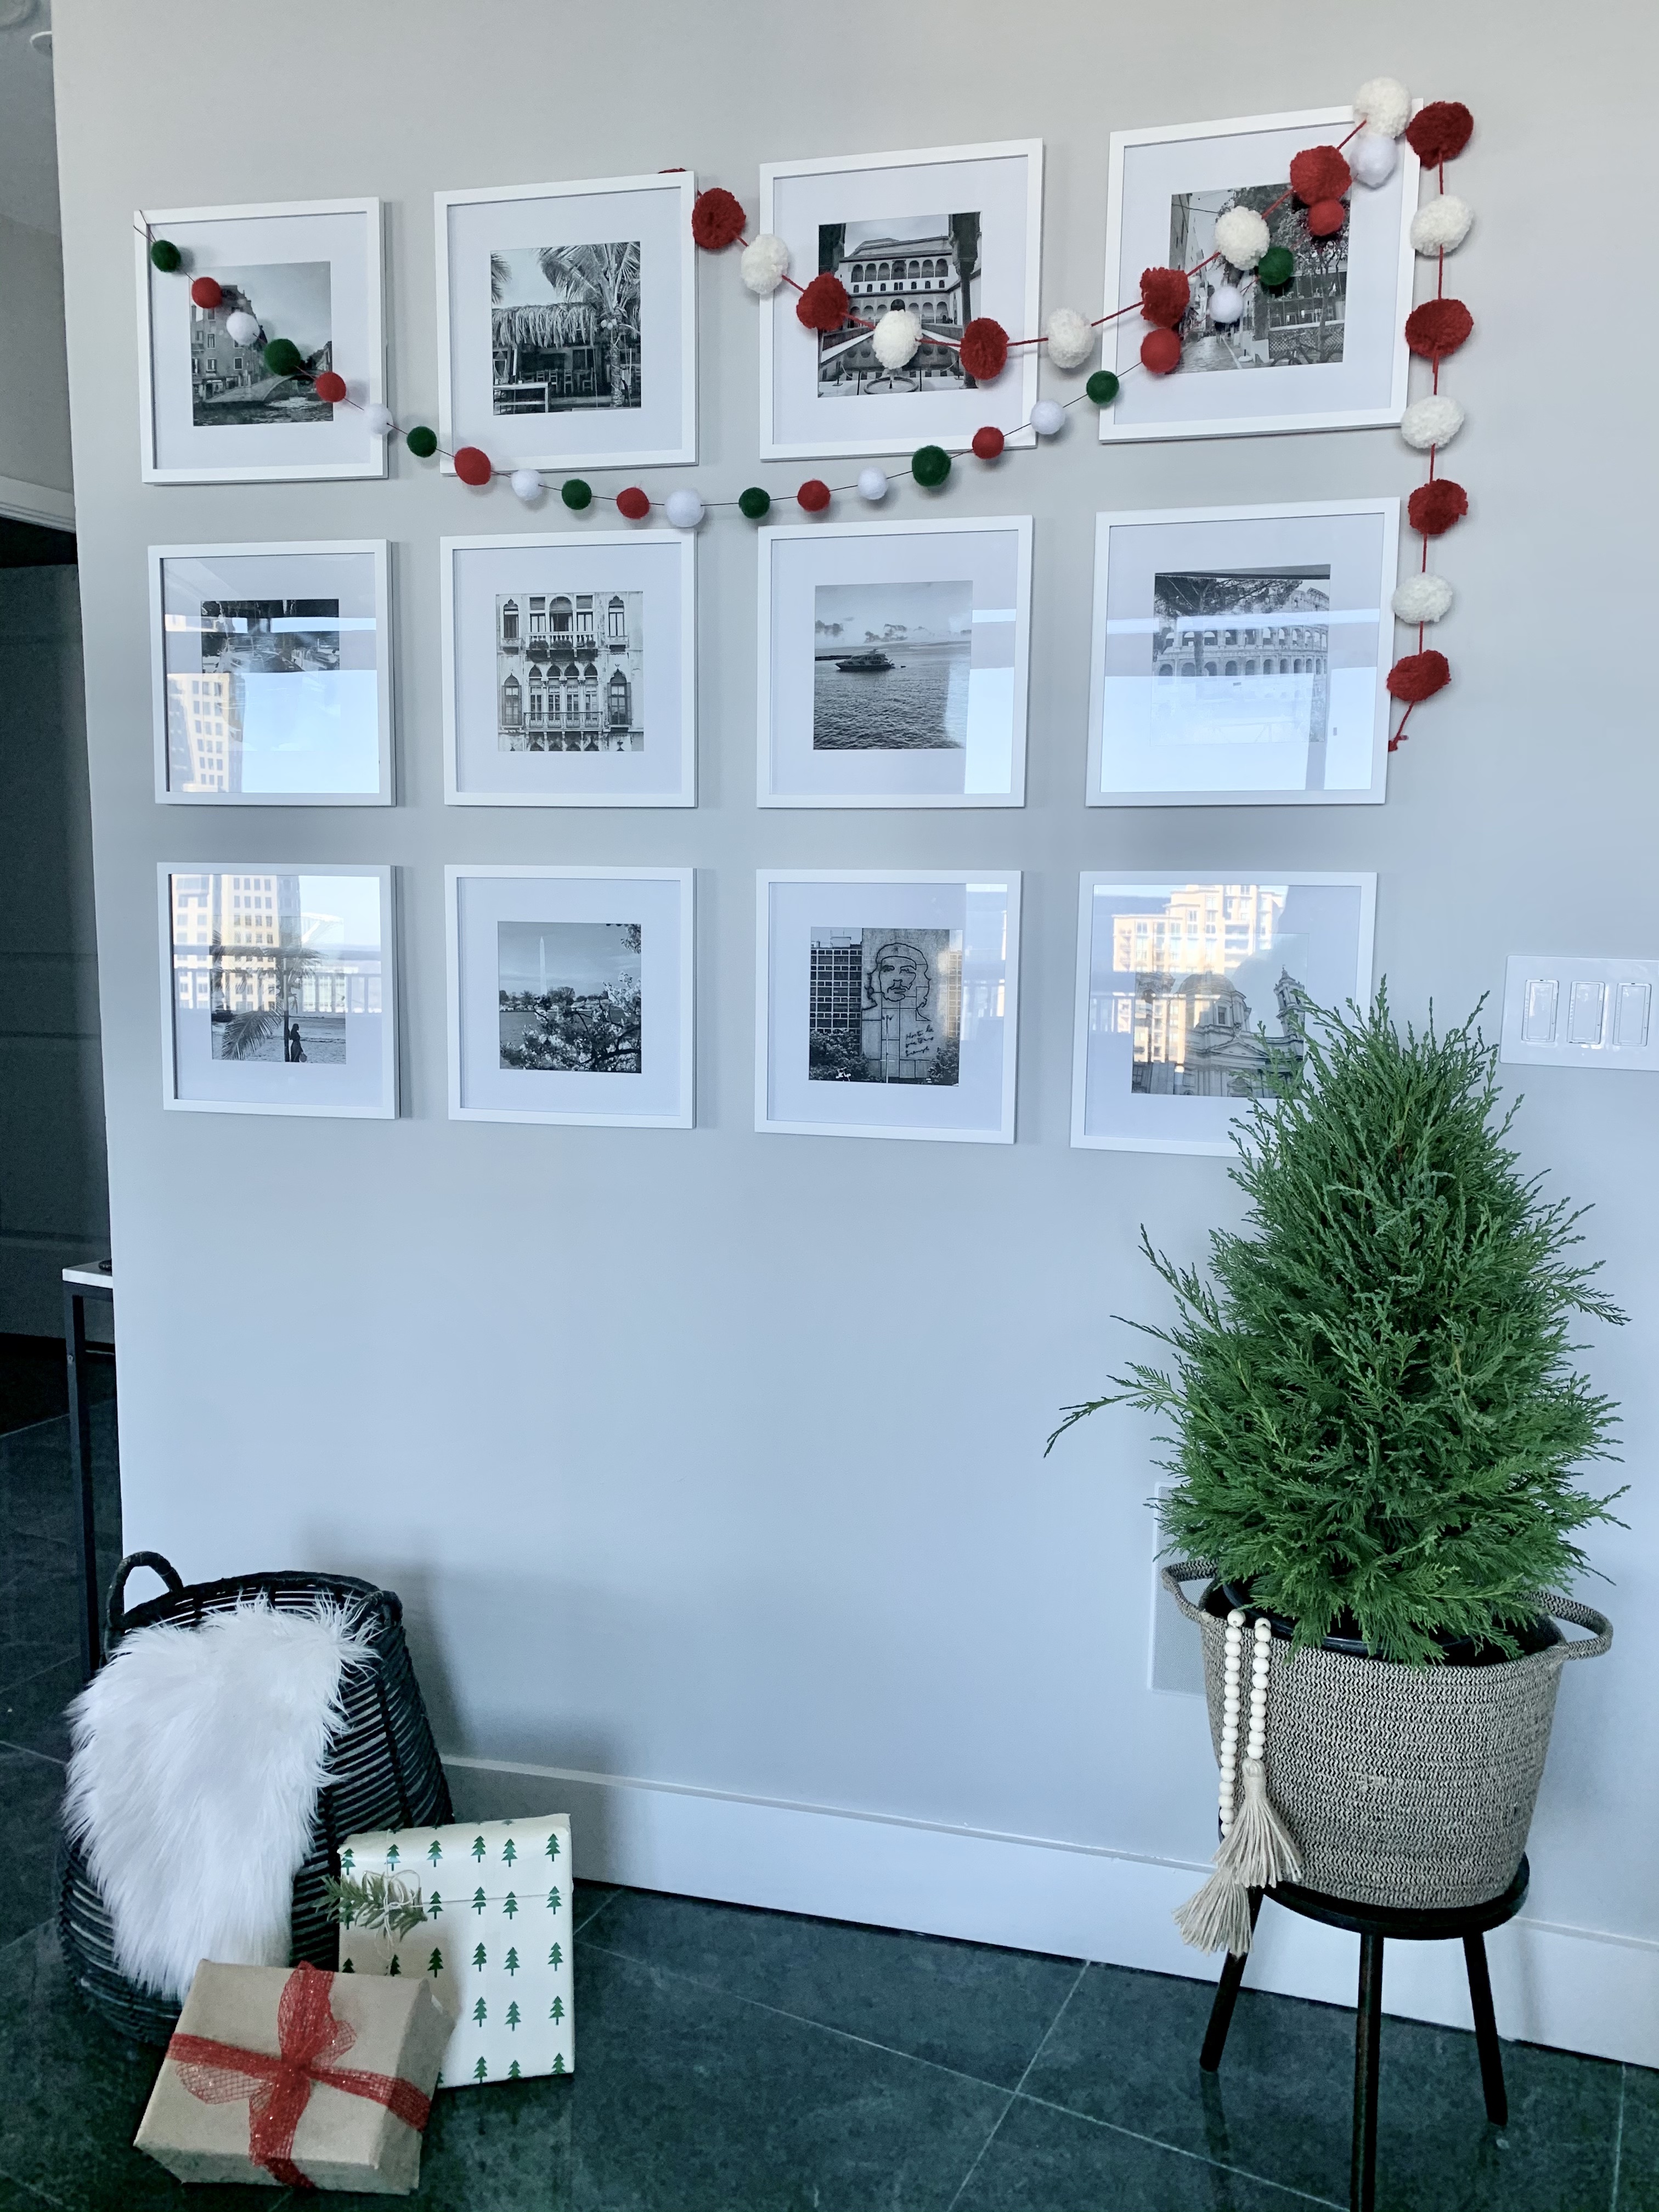 Easy ways To Decorate Your Home For The Holidays While On A Budget